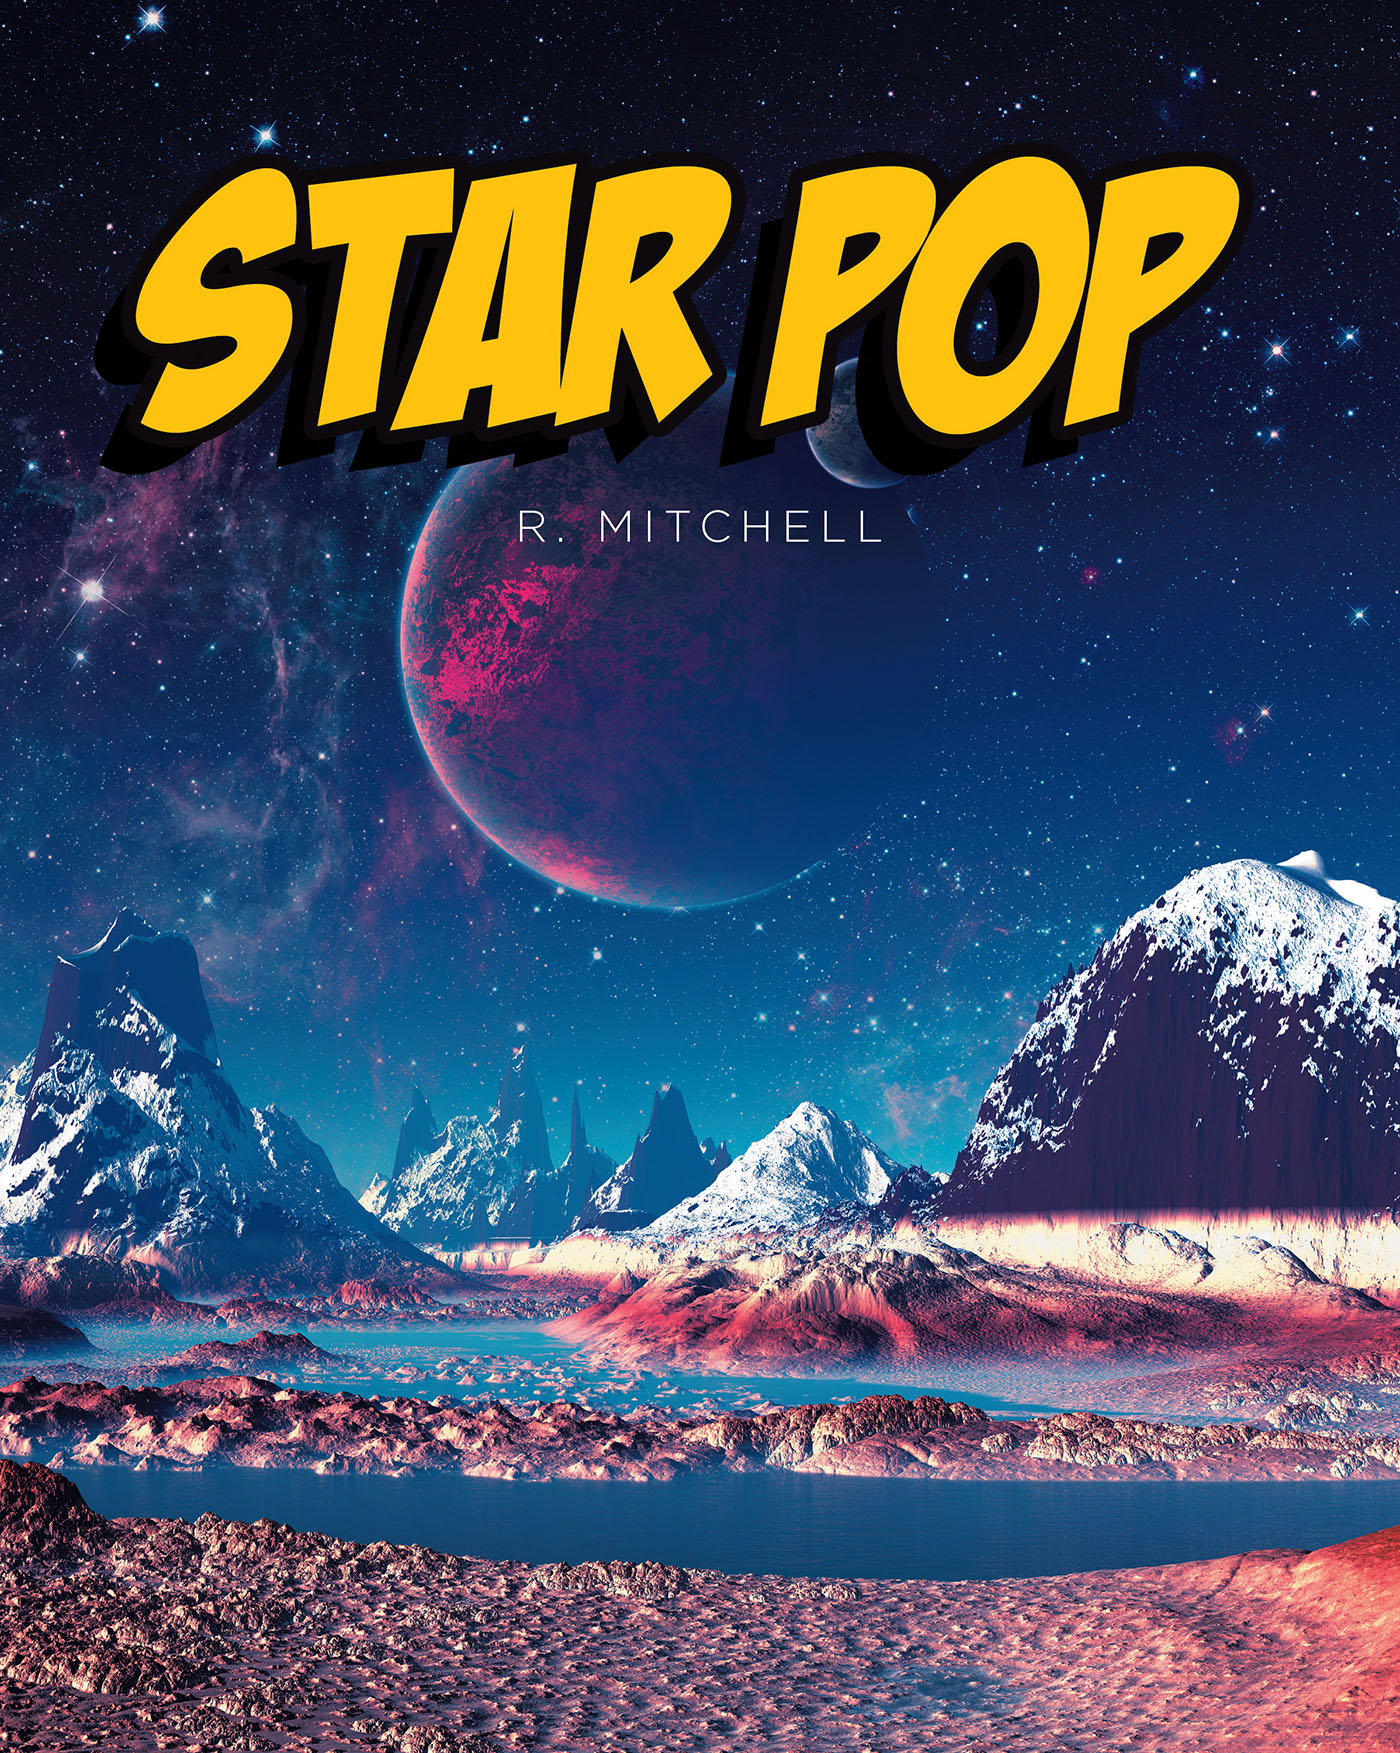 R. Mitchell’s Newly Released "Star Pop" is an Imaginative Adventure of Otherworldly Mischief